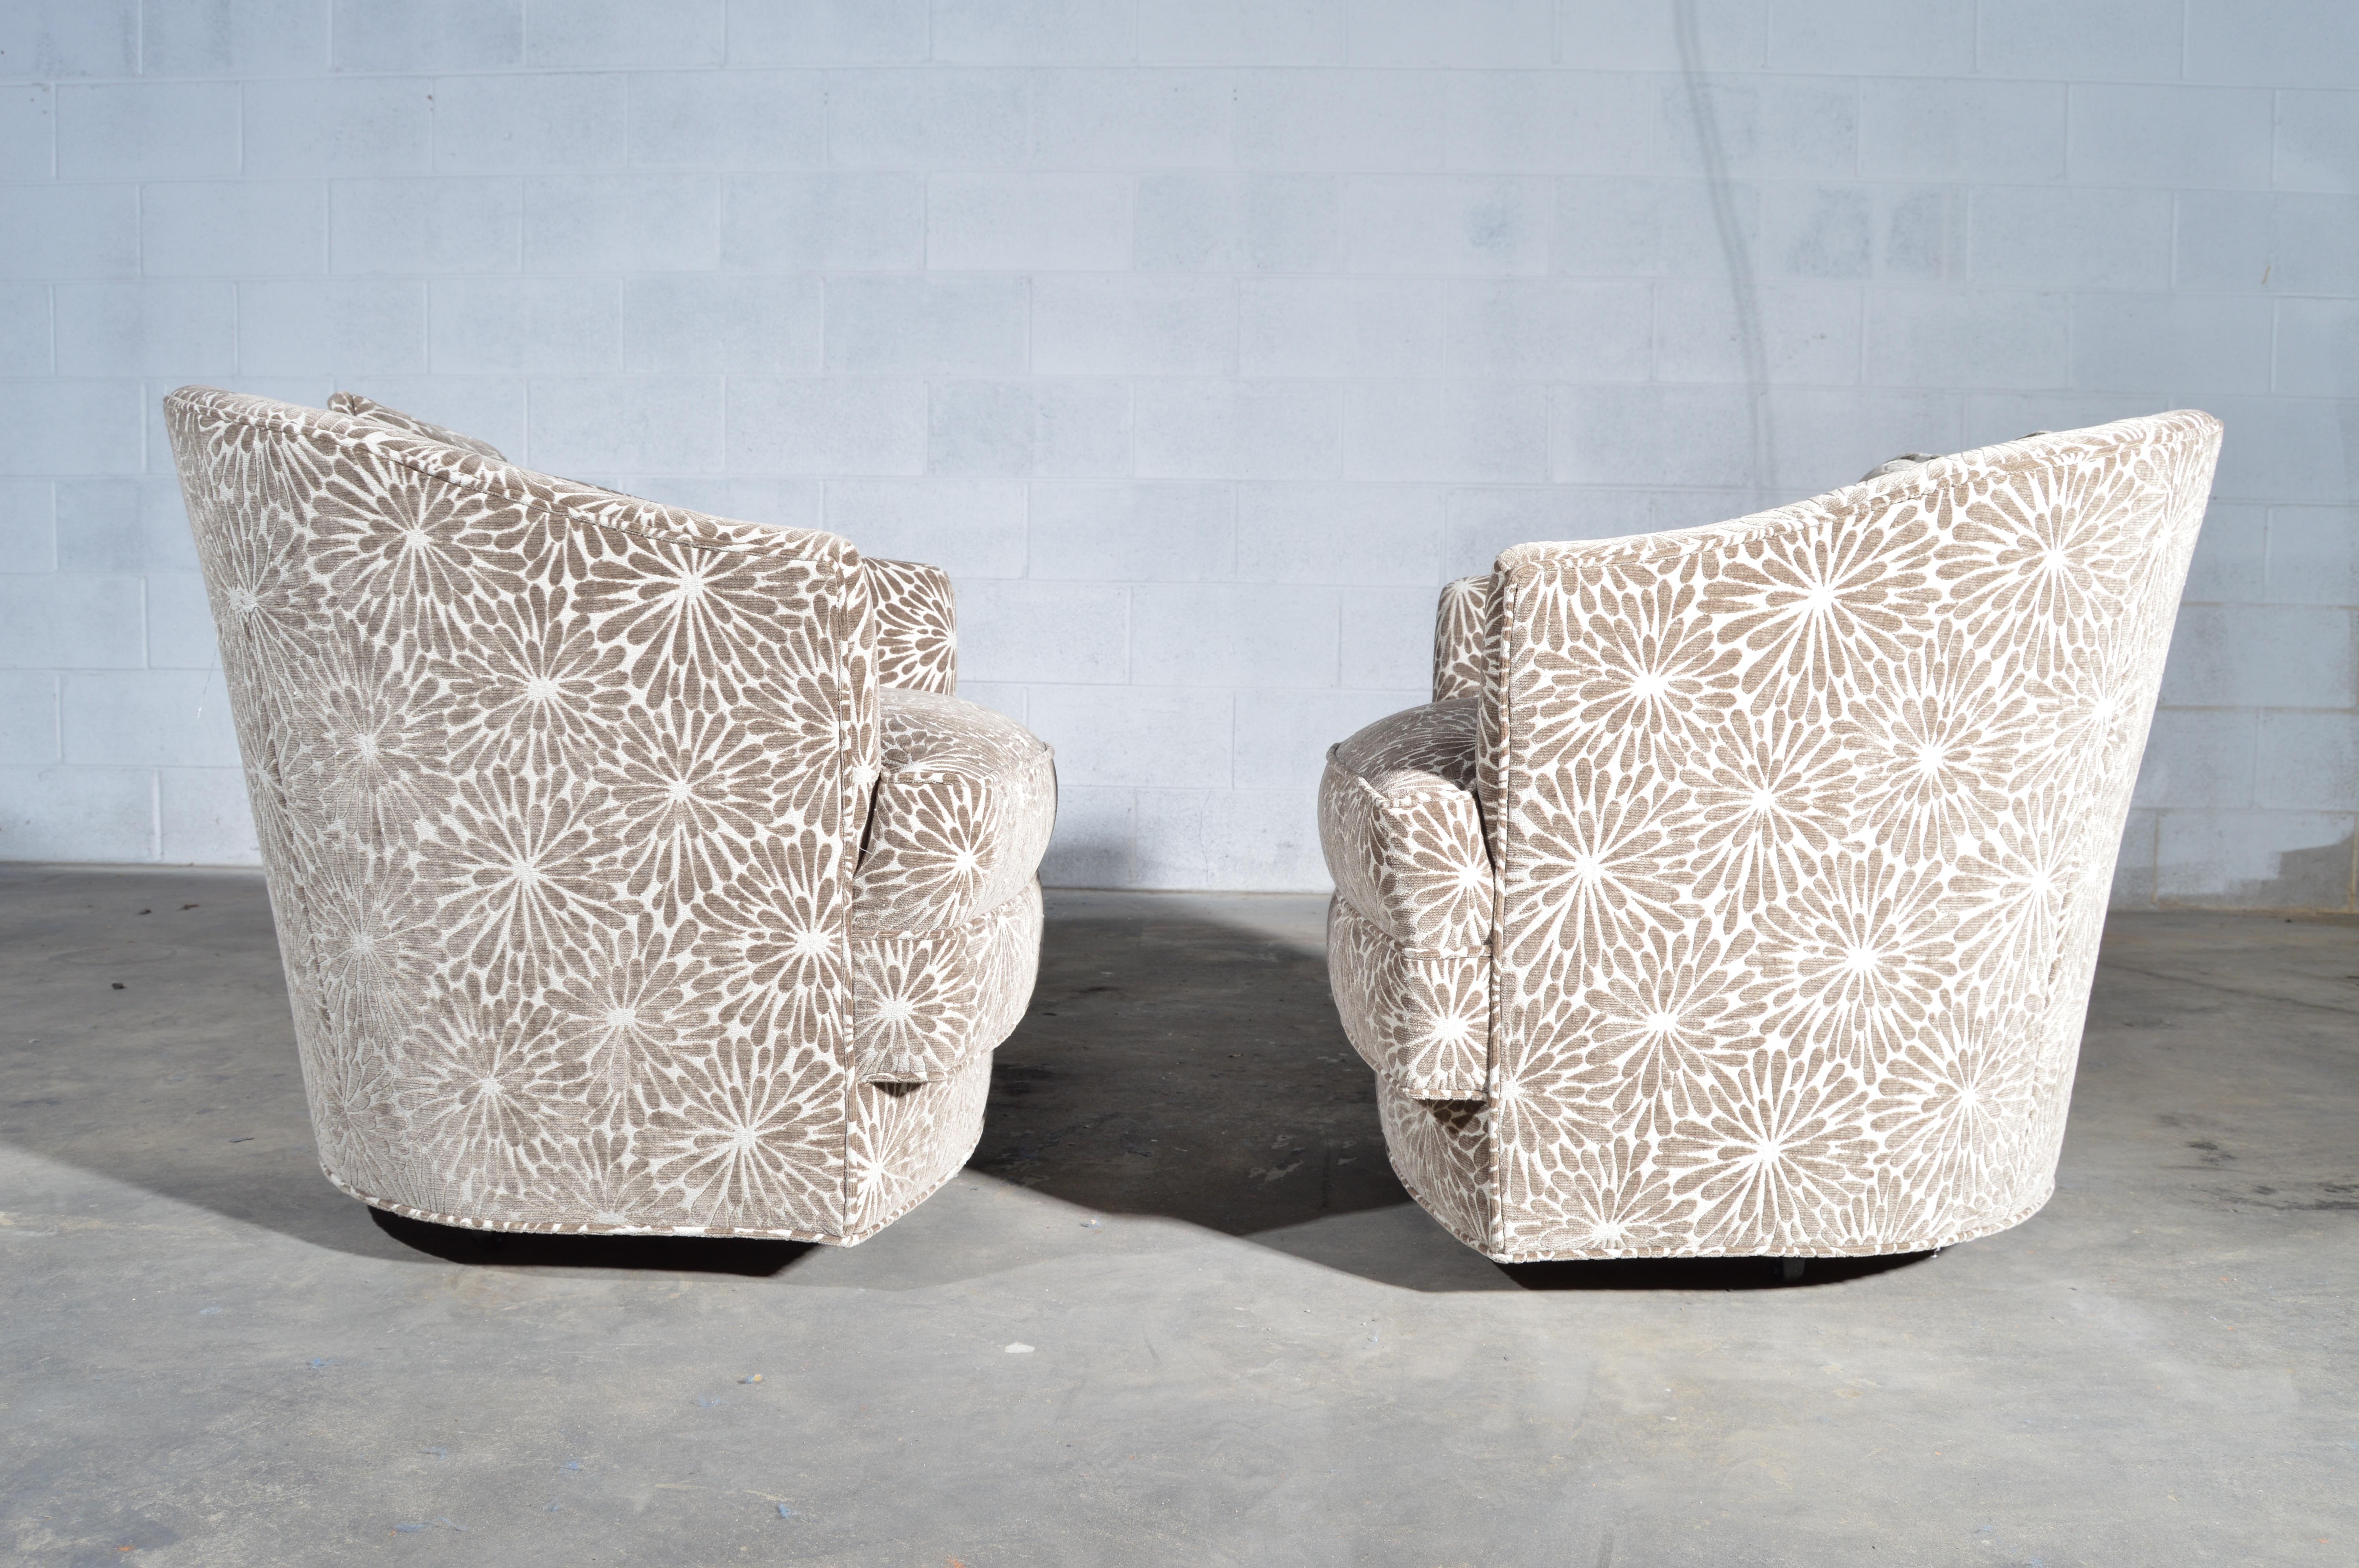 A pair of John Stuart swivel armchairs on casters, model 2150 having textured mohair upholstery.
Produced in 1970 with original labels underneath of both chairs. Each chair comes with its matching throw pillow.